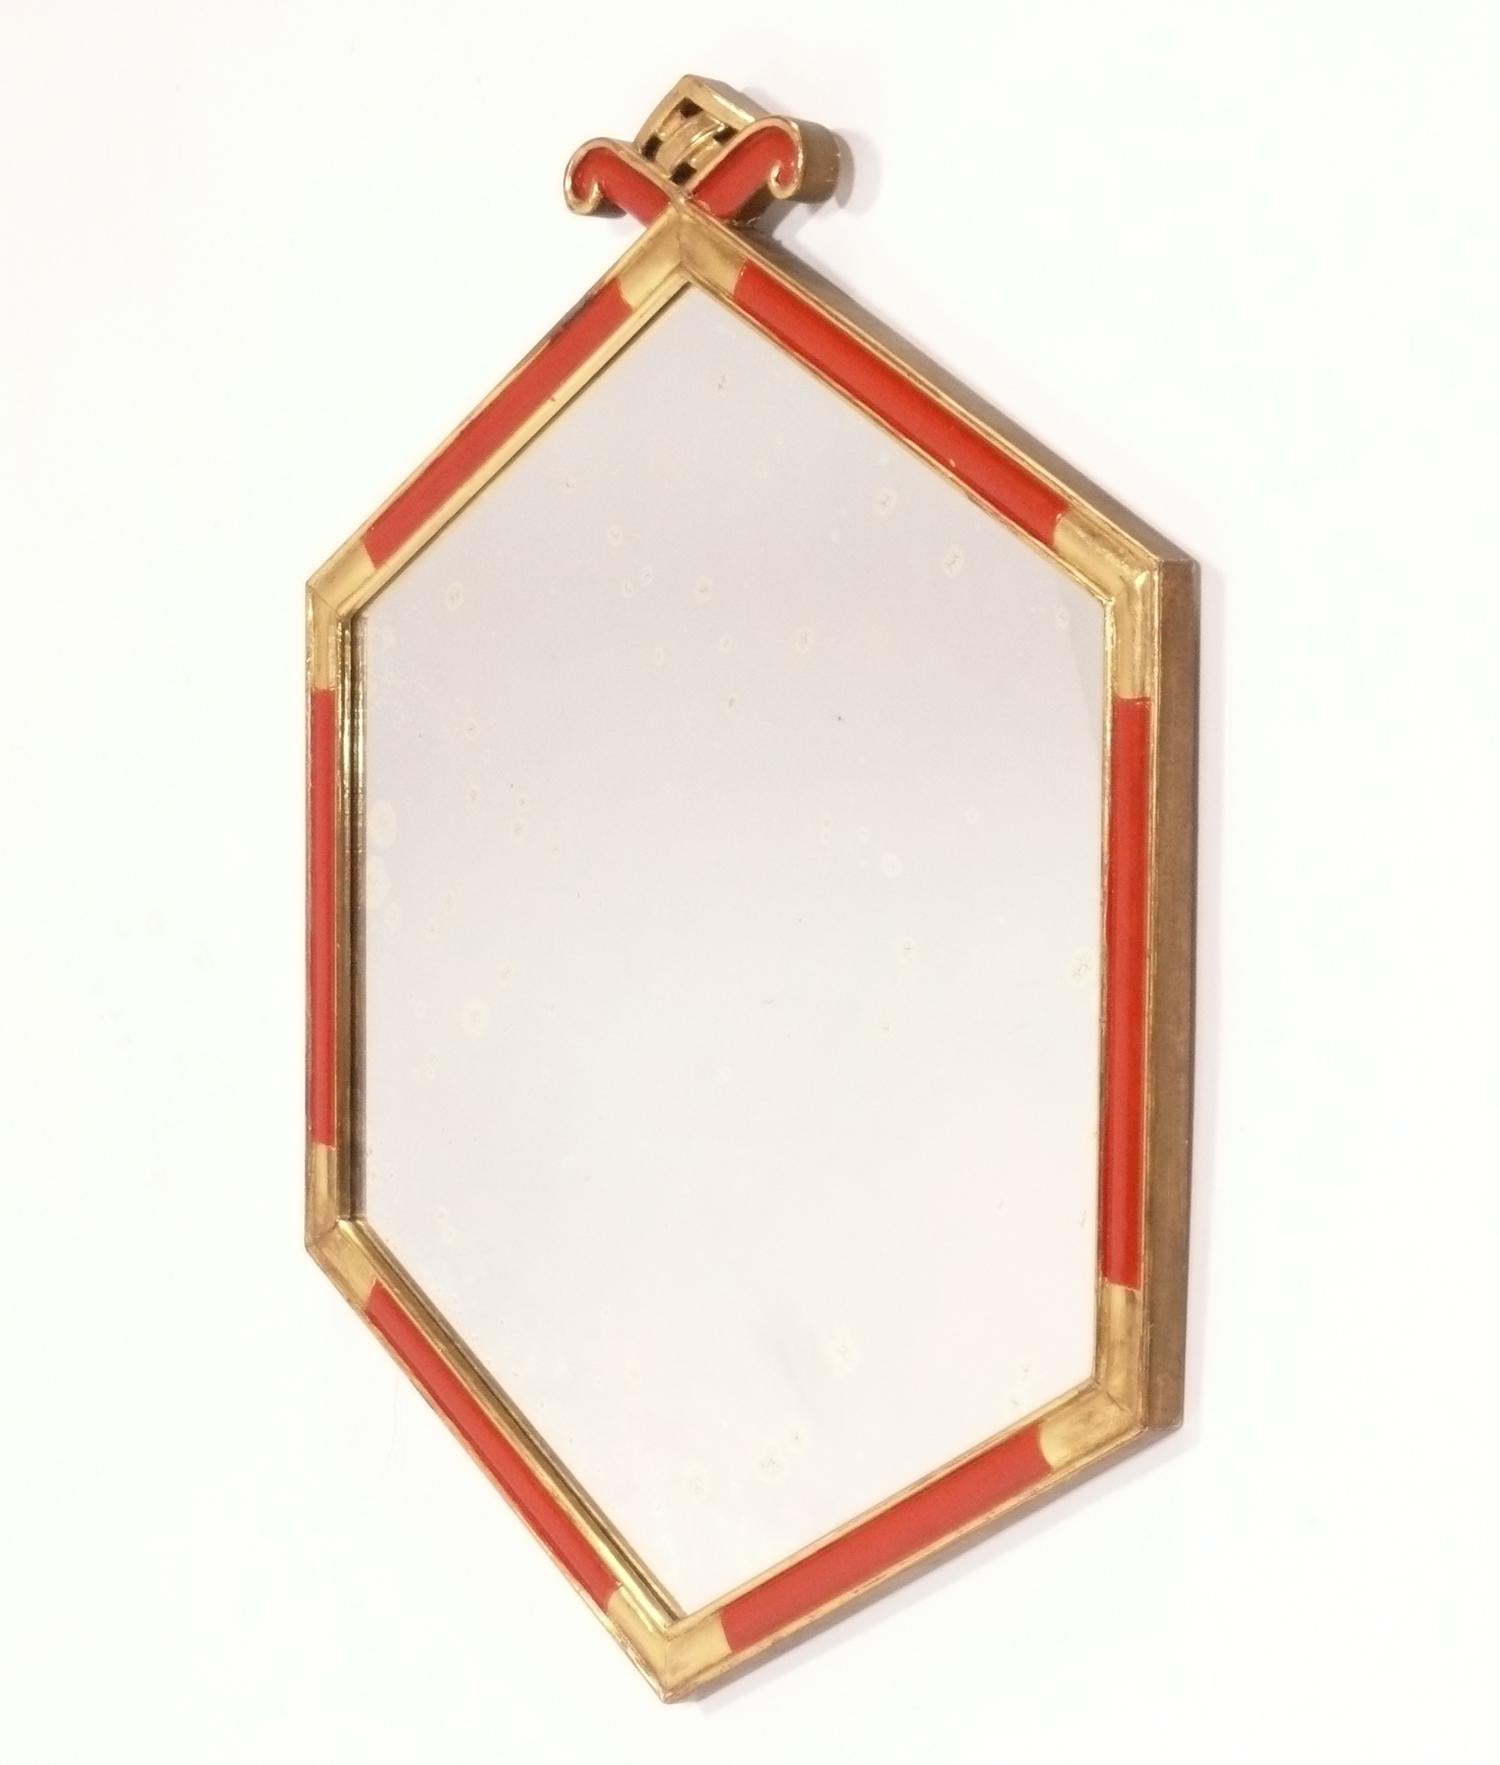 Chinoiserie red lacquer and silver leaf petite mirror, China, circa 1950s. This mirror packs a lot of glamour in a small footprint and would be perfect for a powder room. Retains warm original patina. It measures 23